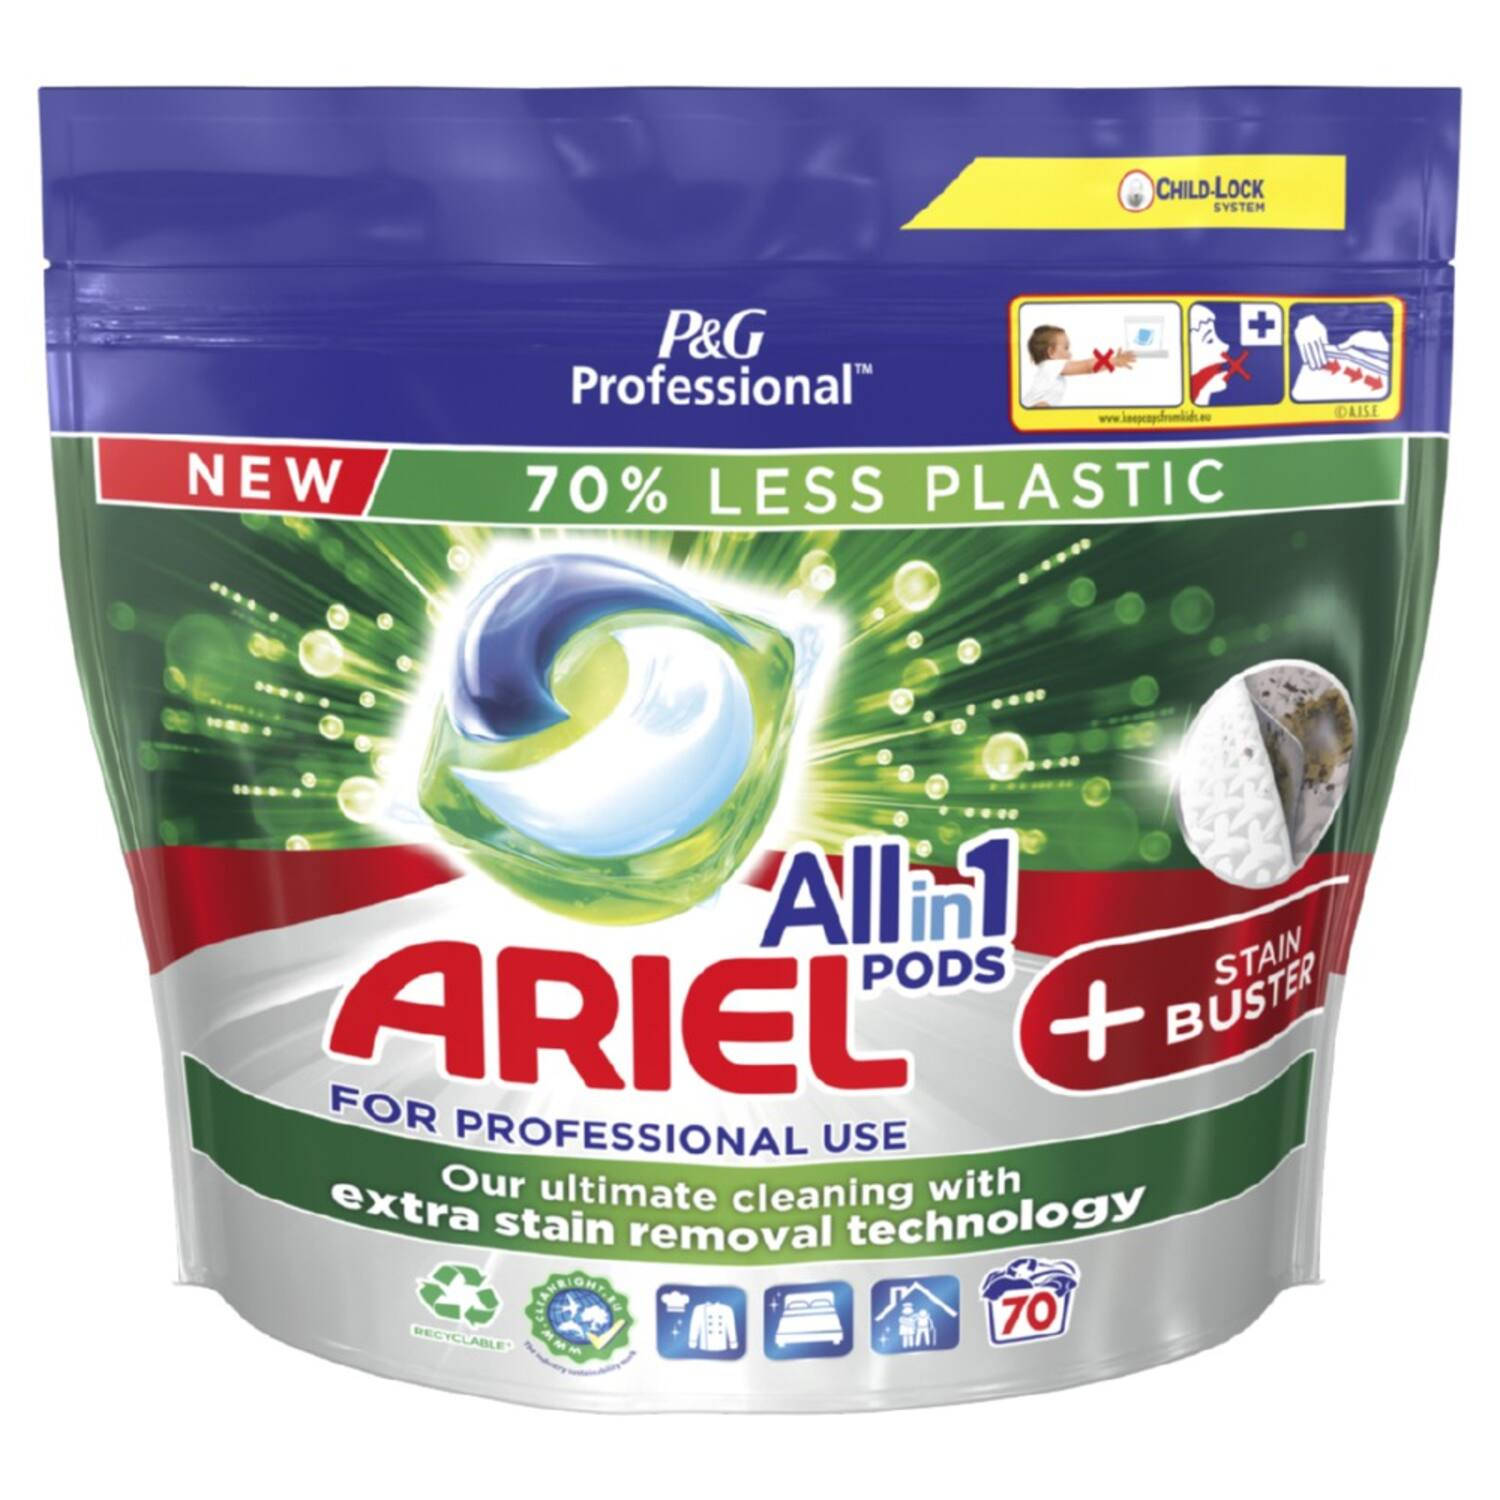 Ariel Professional All-in-1 pods + Stain Buster 70 stuks